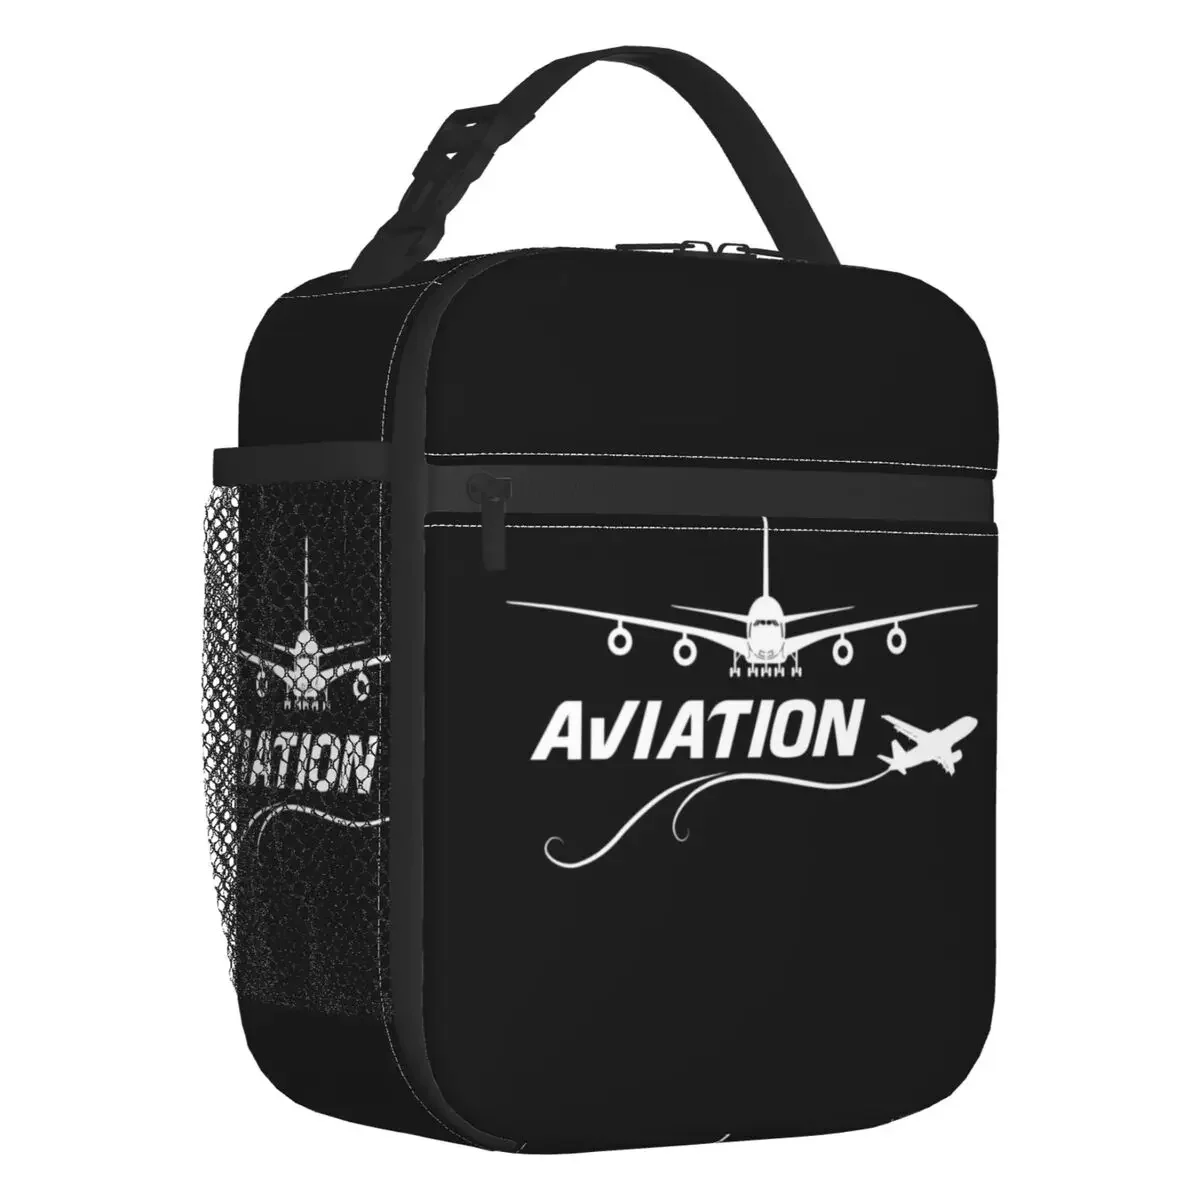 

Aviation Lover Resuable Lunch Box Leakproof Airplane Pilot Aviator Air Fighter Thermal Cooler Food Insulated Lunch Bag School